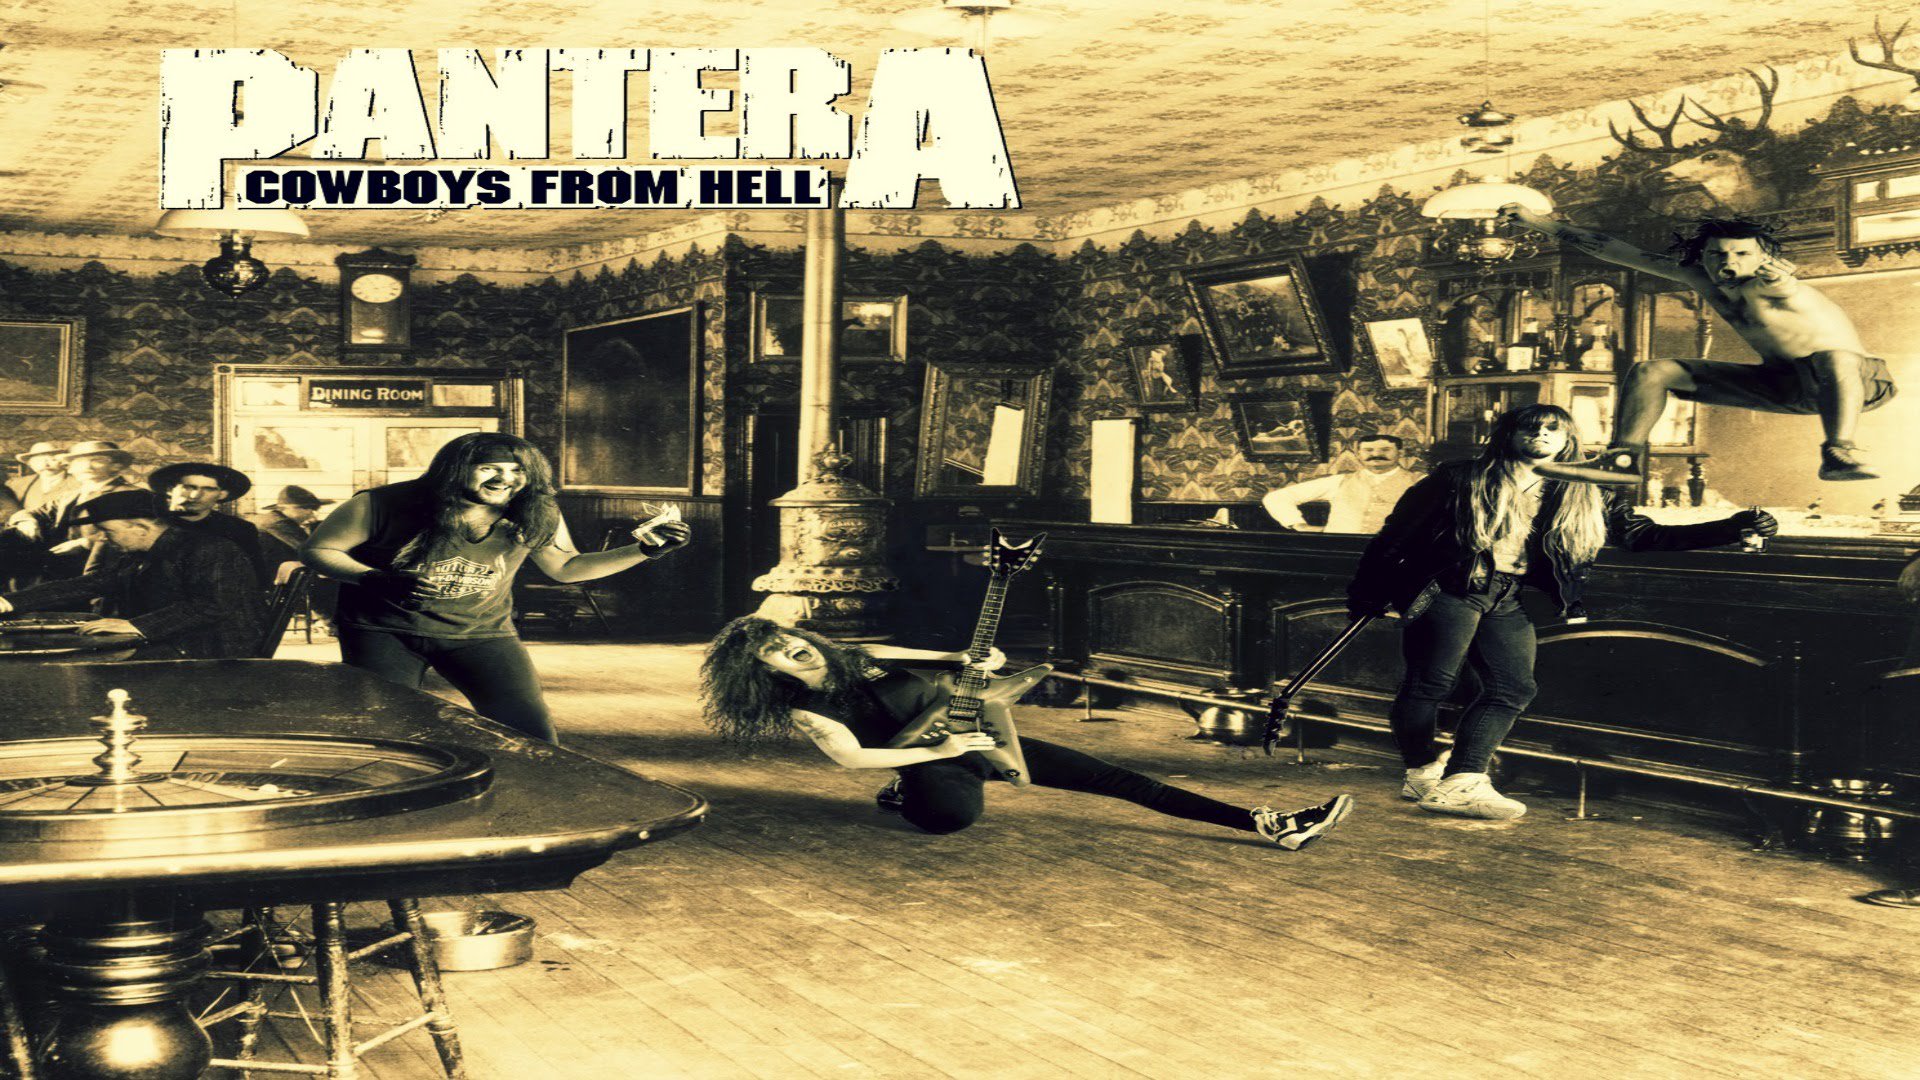 Monsters Of Rock® this day in 'Cowboys from Hell', the fifth studio album and major label debut from Pantera was released. #RIPDimebag #RIPVinnePaul